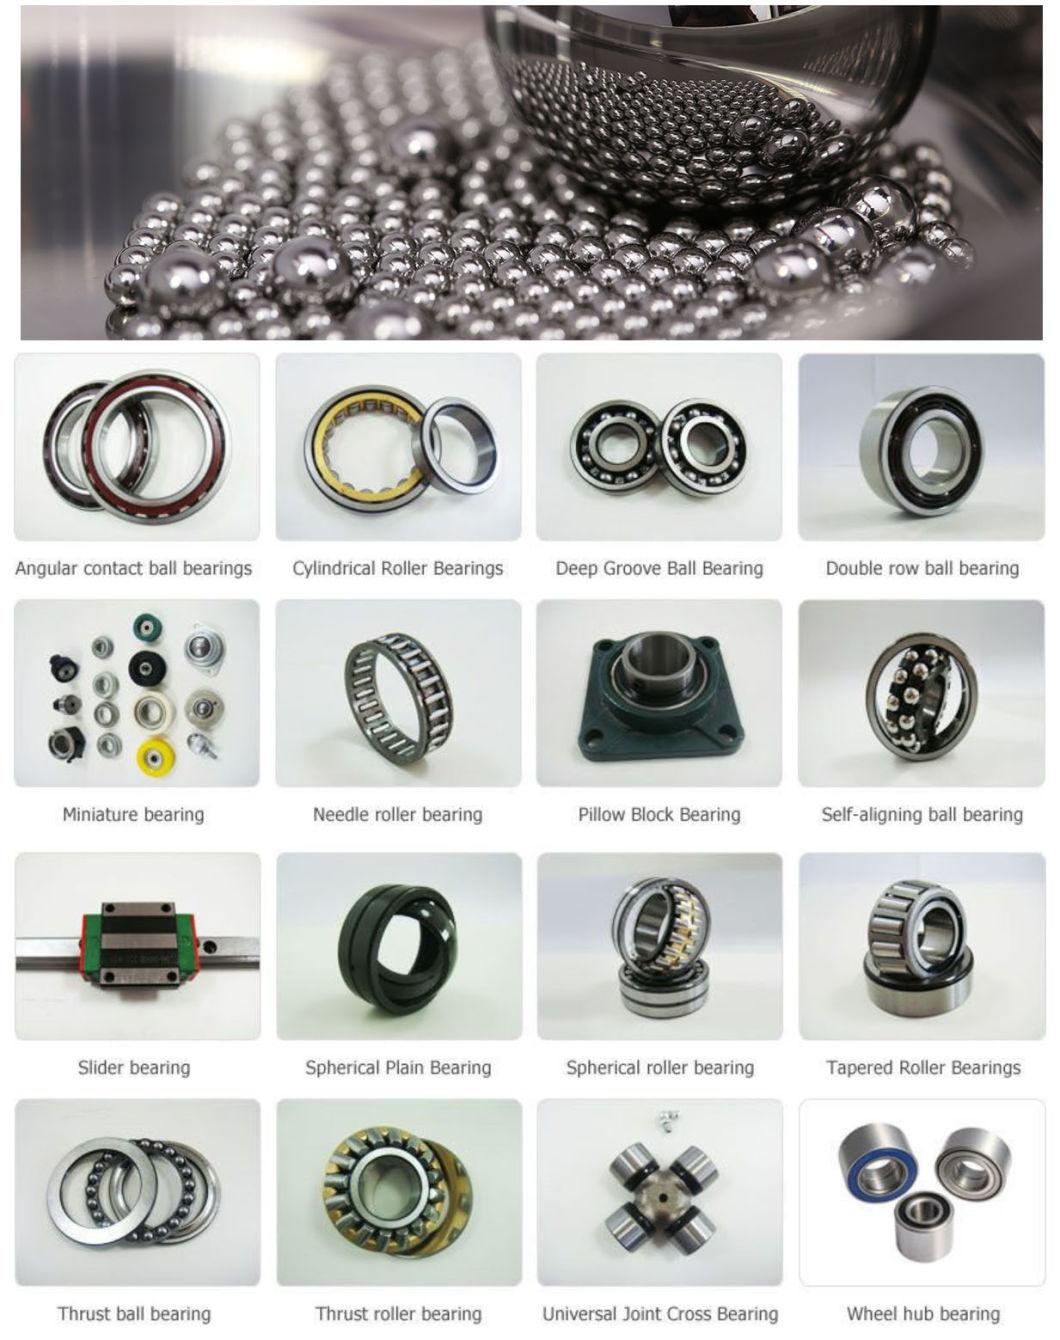 Heavy Load Factory Price Original Textile Machinery Bearings